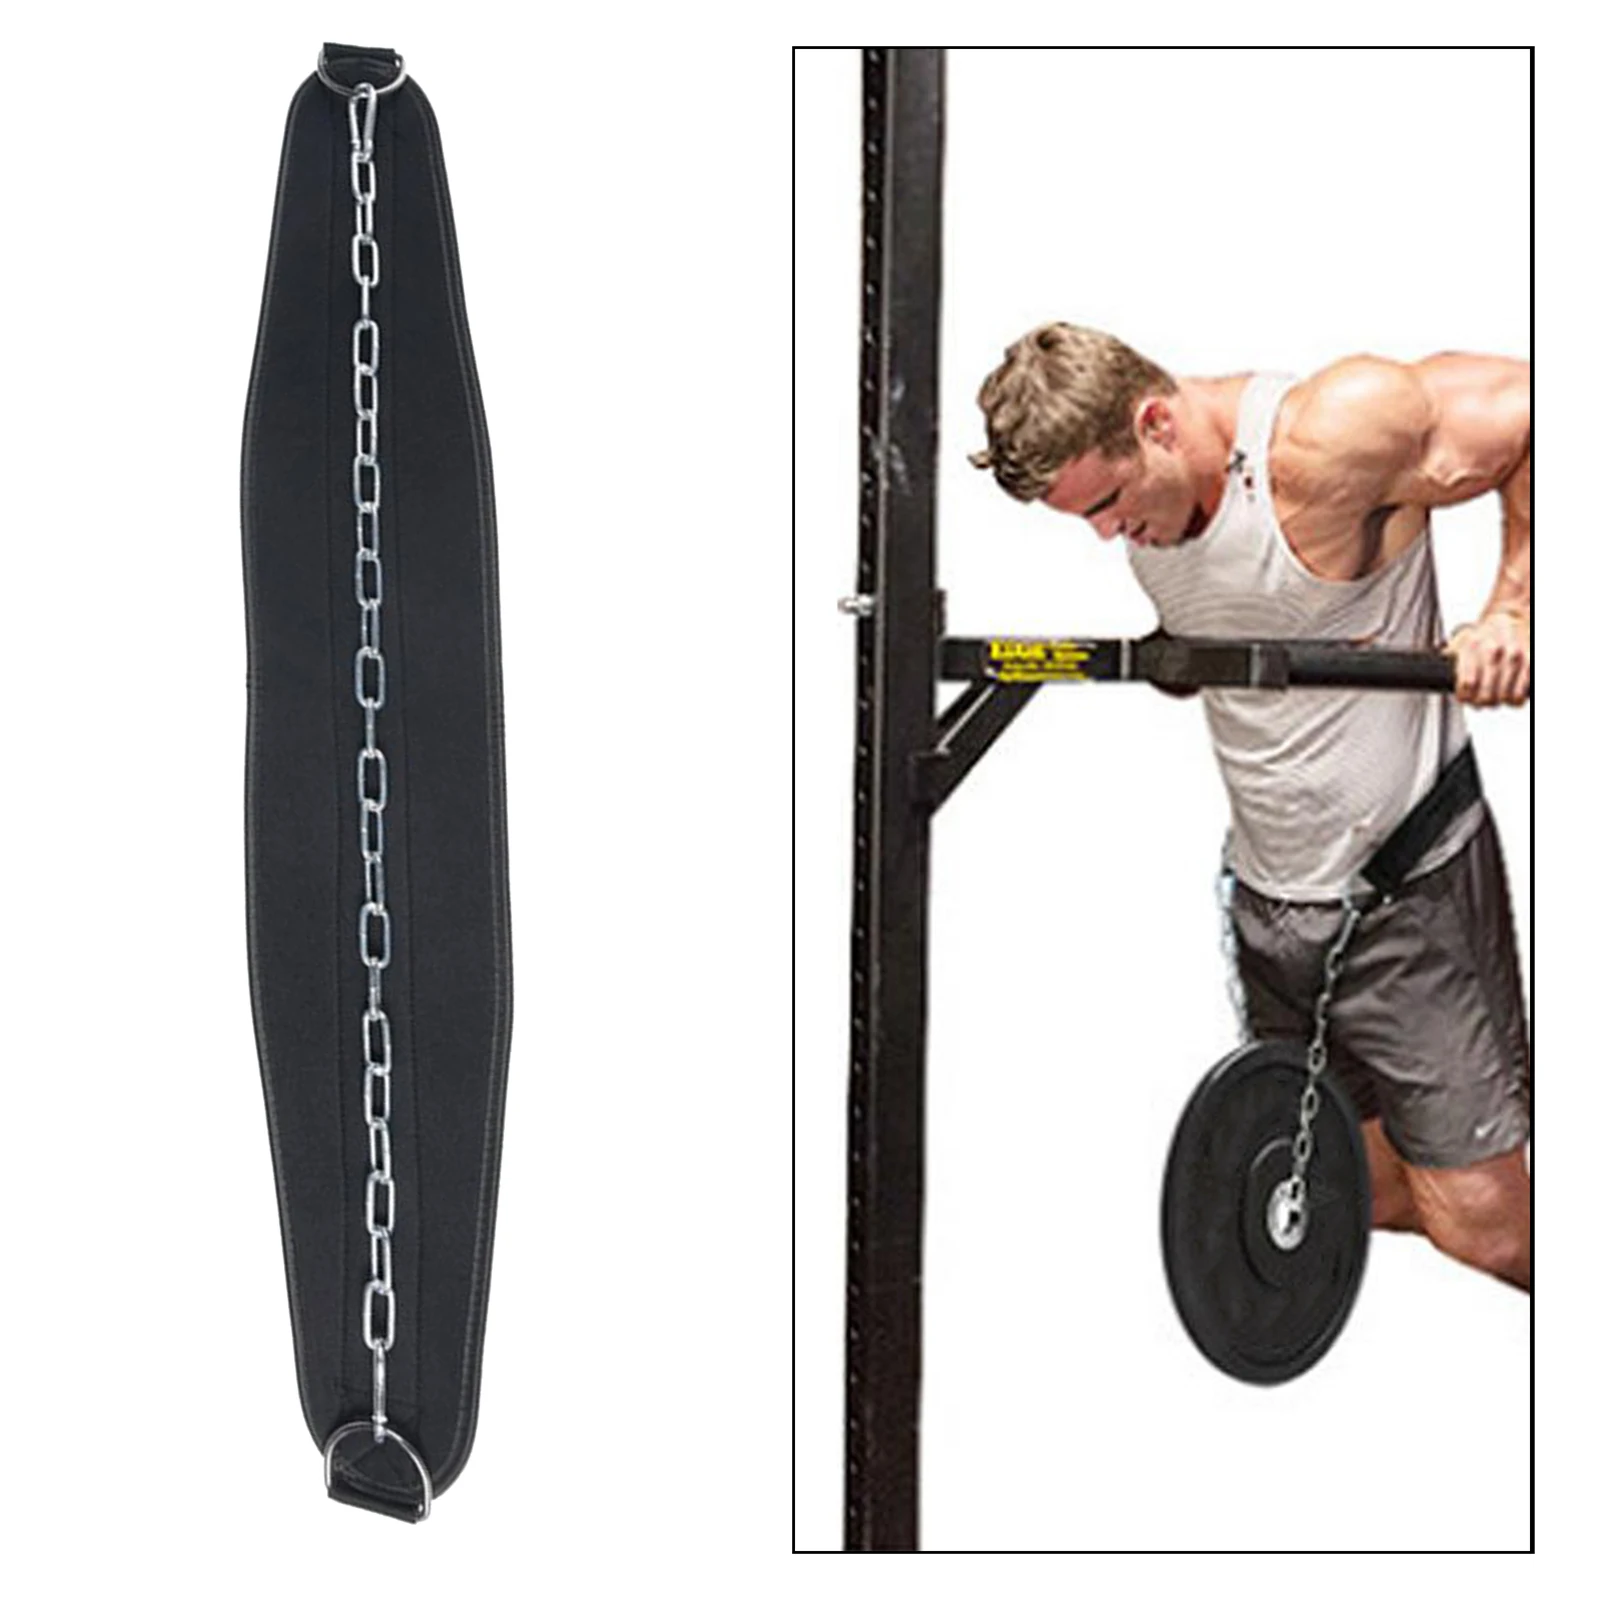 Fitness Pull Up Dip Belt Bodybuilding Gym Weight Lifting Strength Workout Wear 